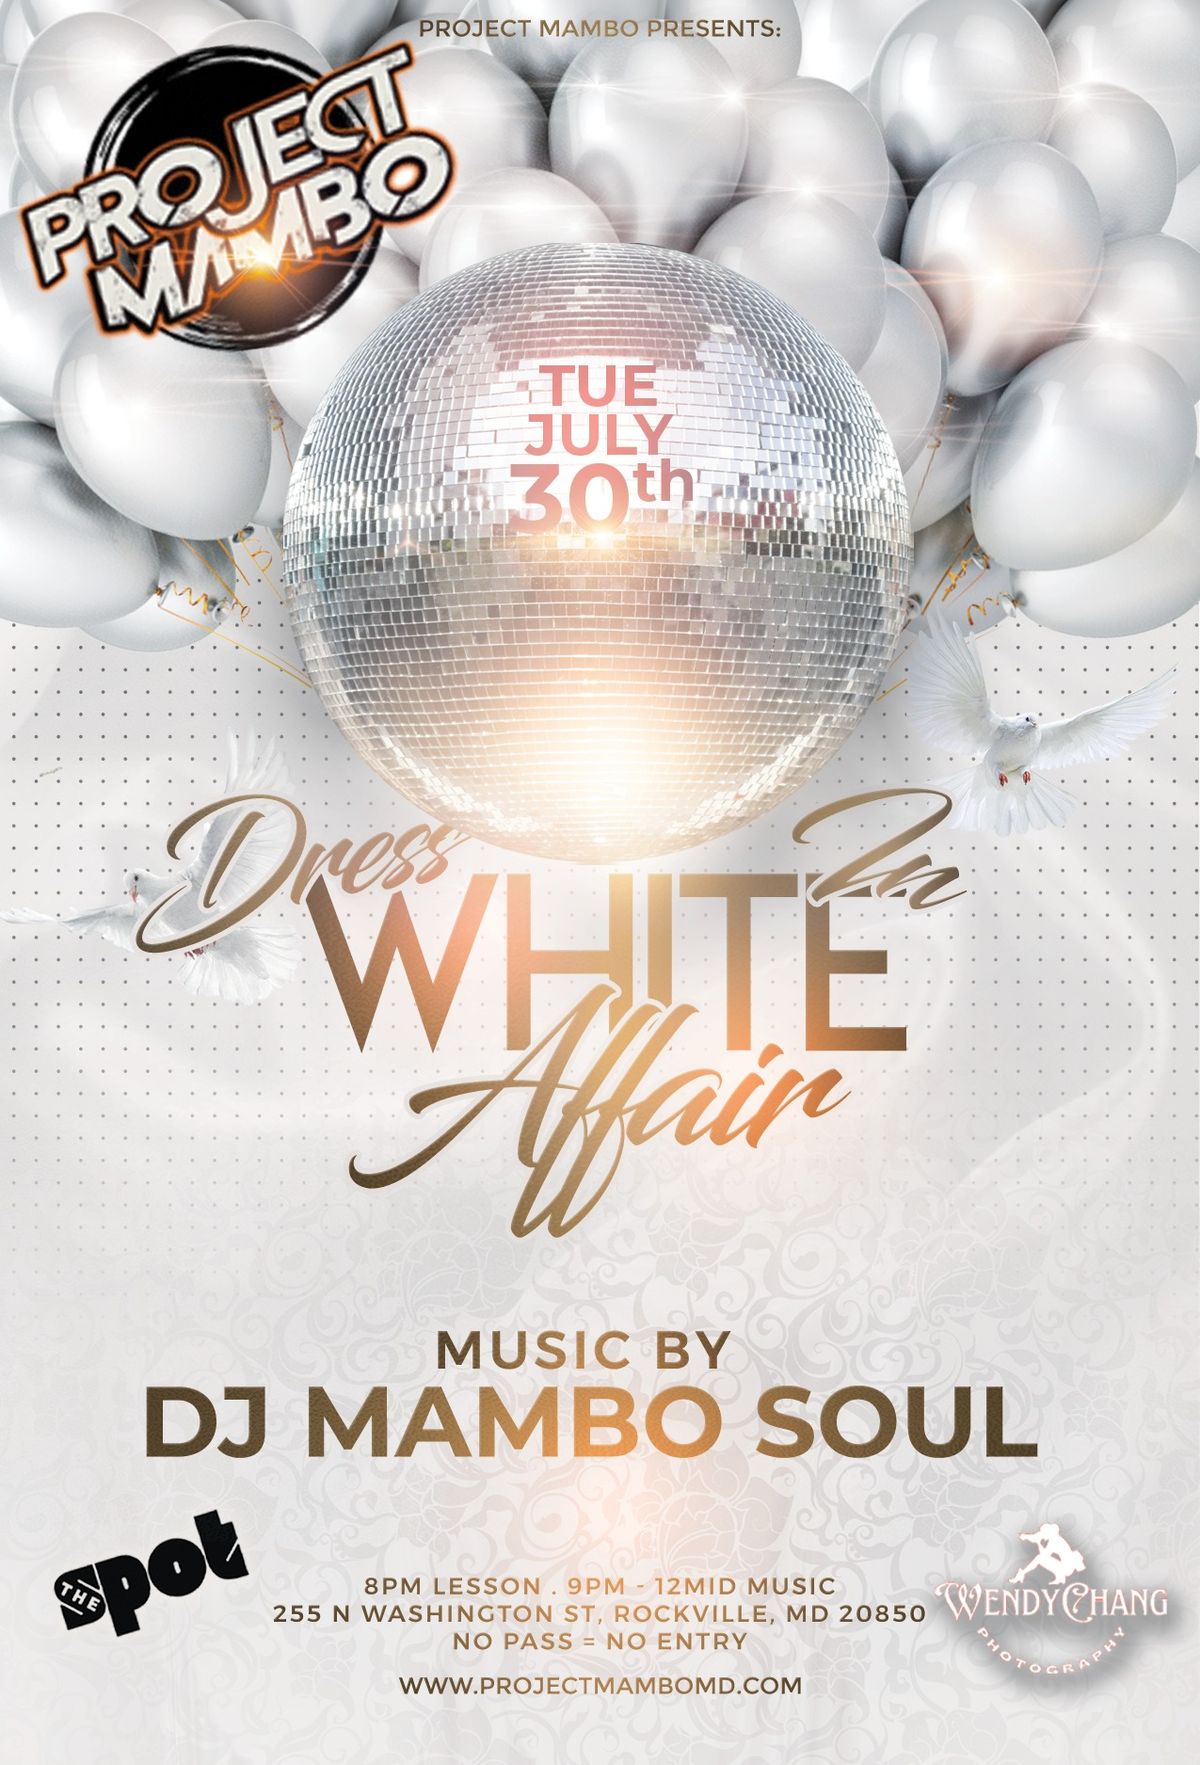 Project Mambo 1st Annual Dress in White Affair